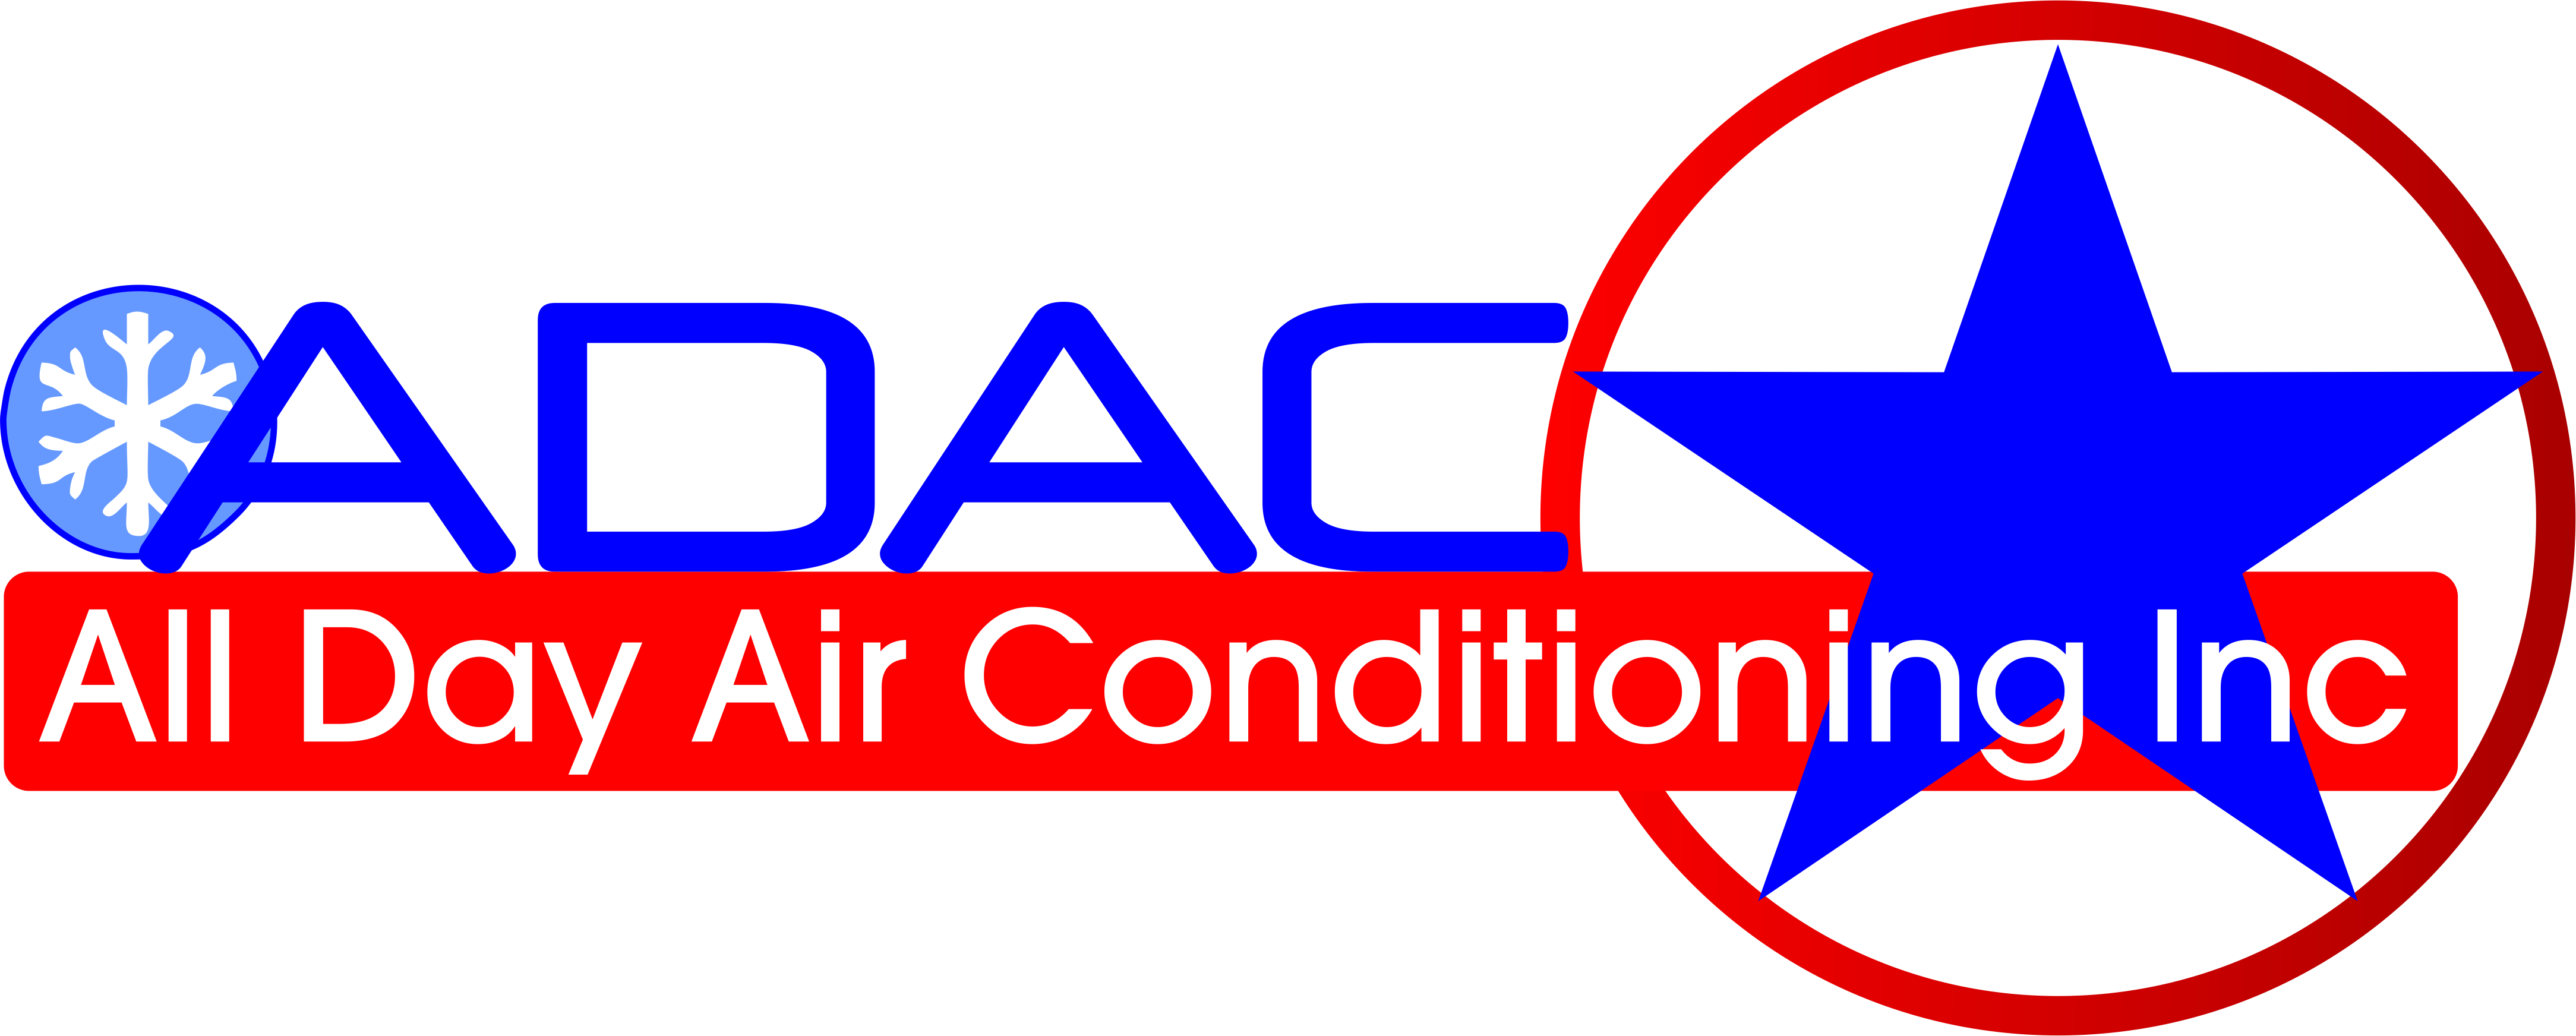 All Day Air Conditioning Inc Logo